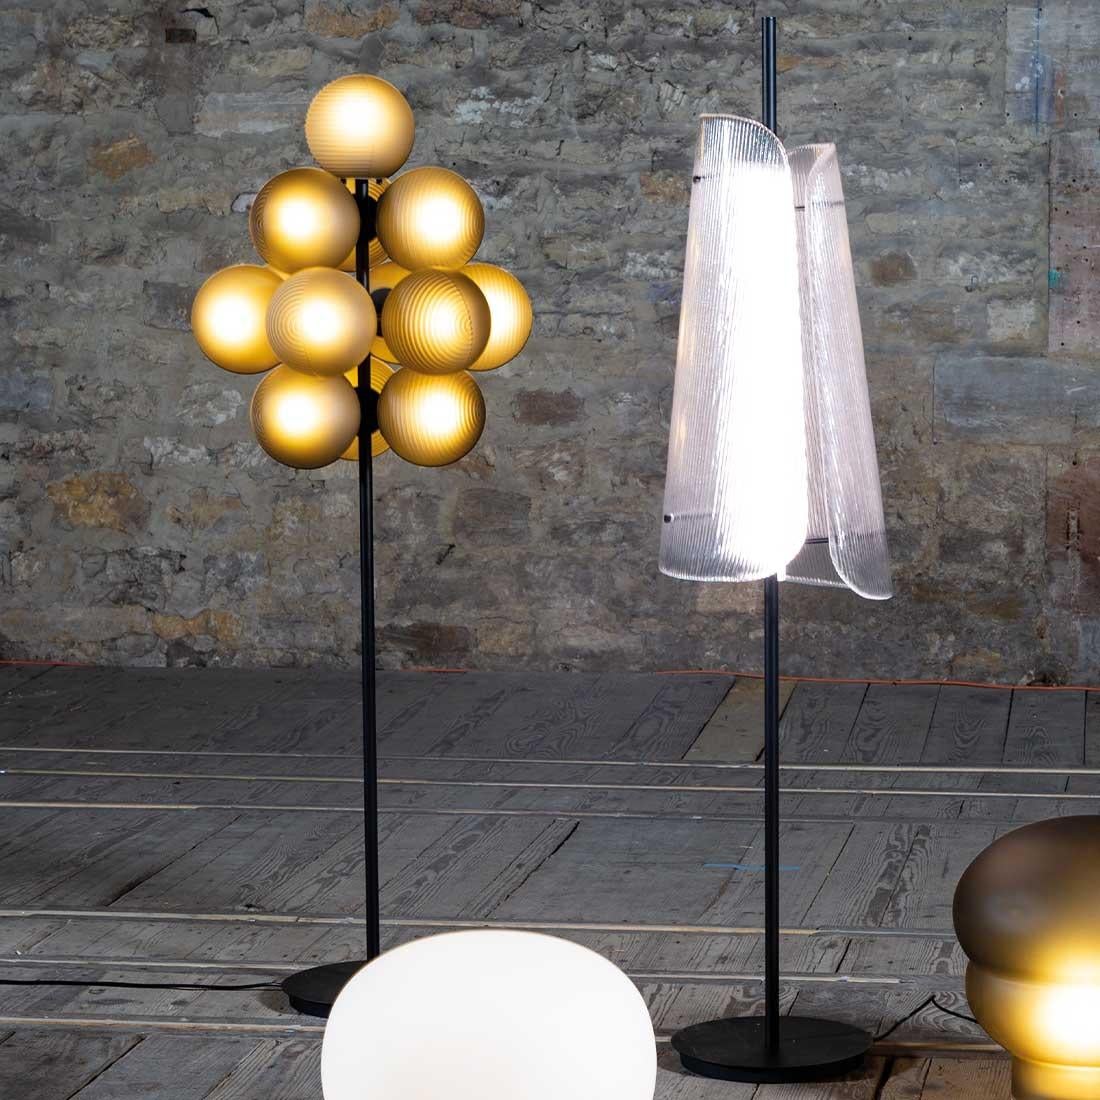 Sebastian Herkner’s stellar grape bundles numerous stellars to form a bunch in order to orchestrate lighting to a close encounter of real lighting innovation. The grape-like suspension light shines in colour variations of one’s own choice: